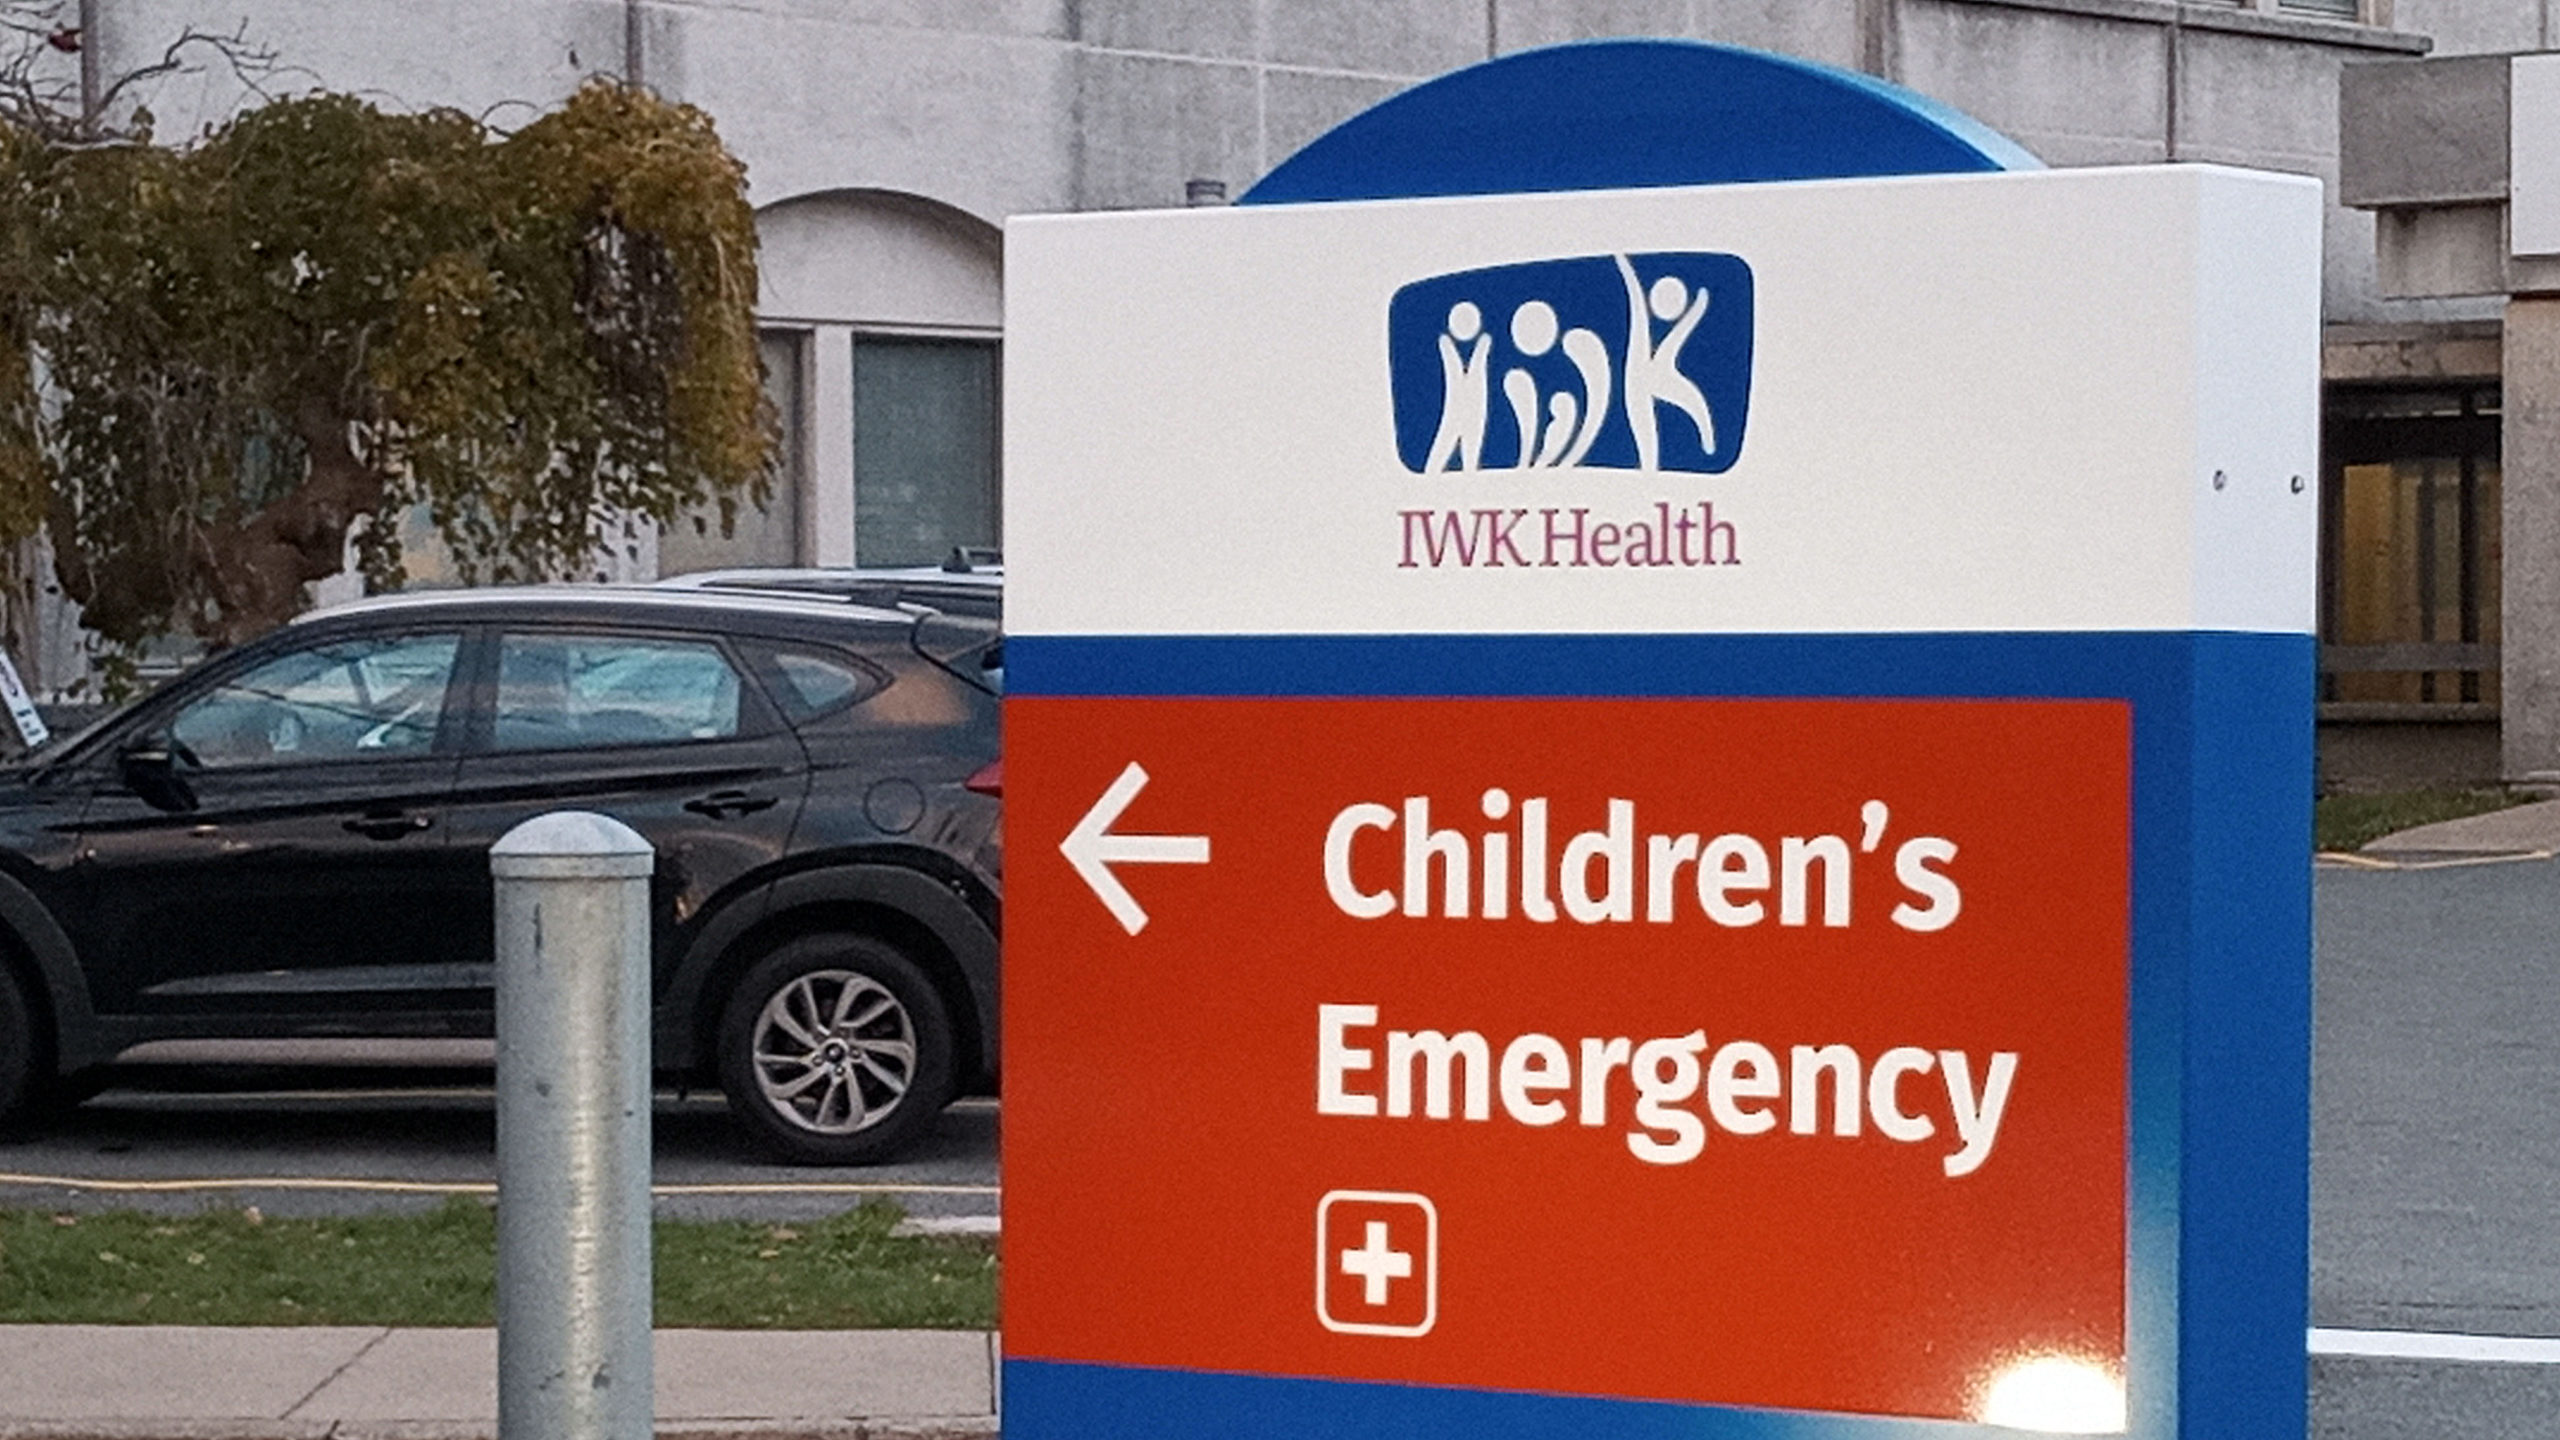 An image of the IWK Health Centre's sign pointing to the children's emergency